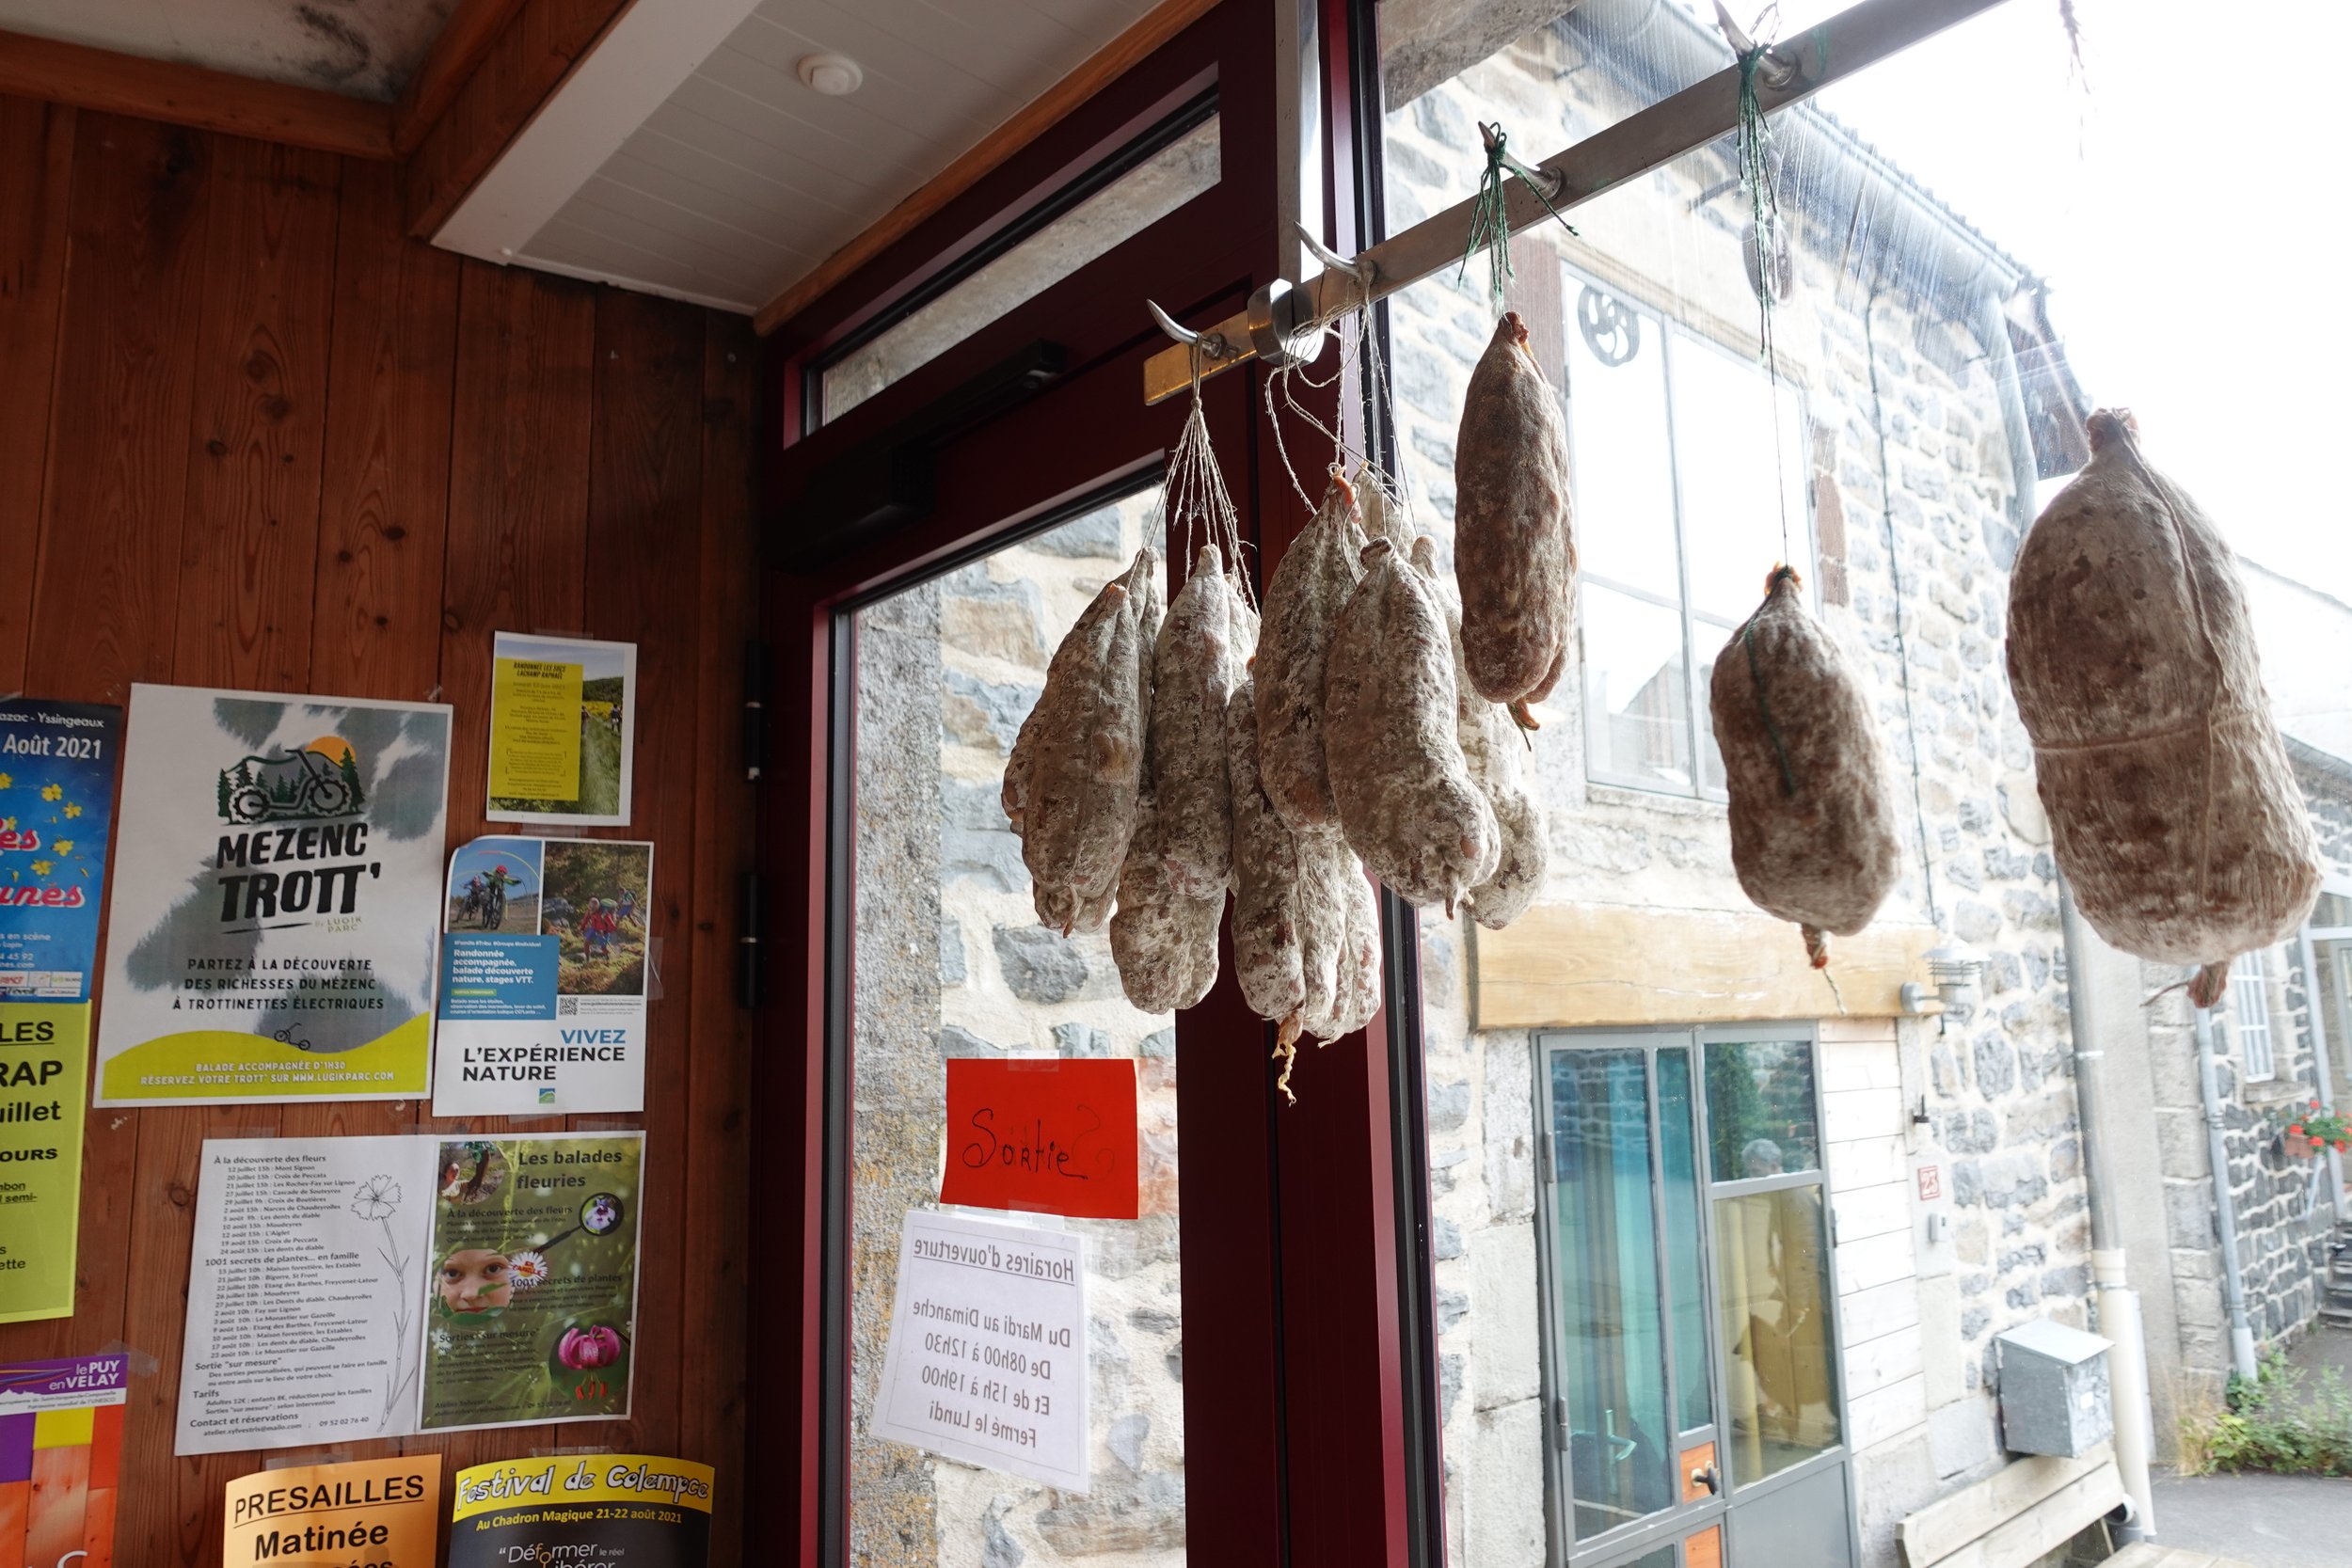 Cured meats at the charcuterie of Les Estables Village